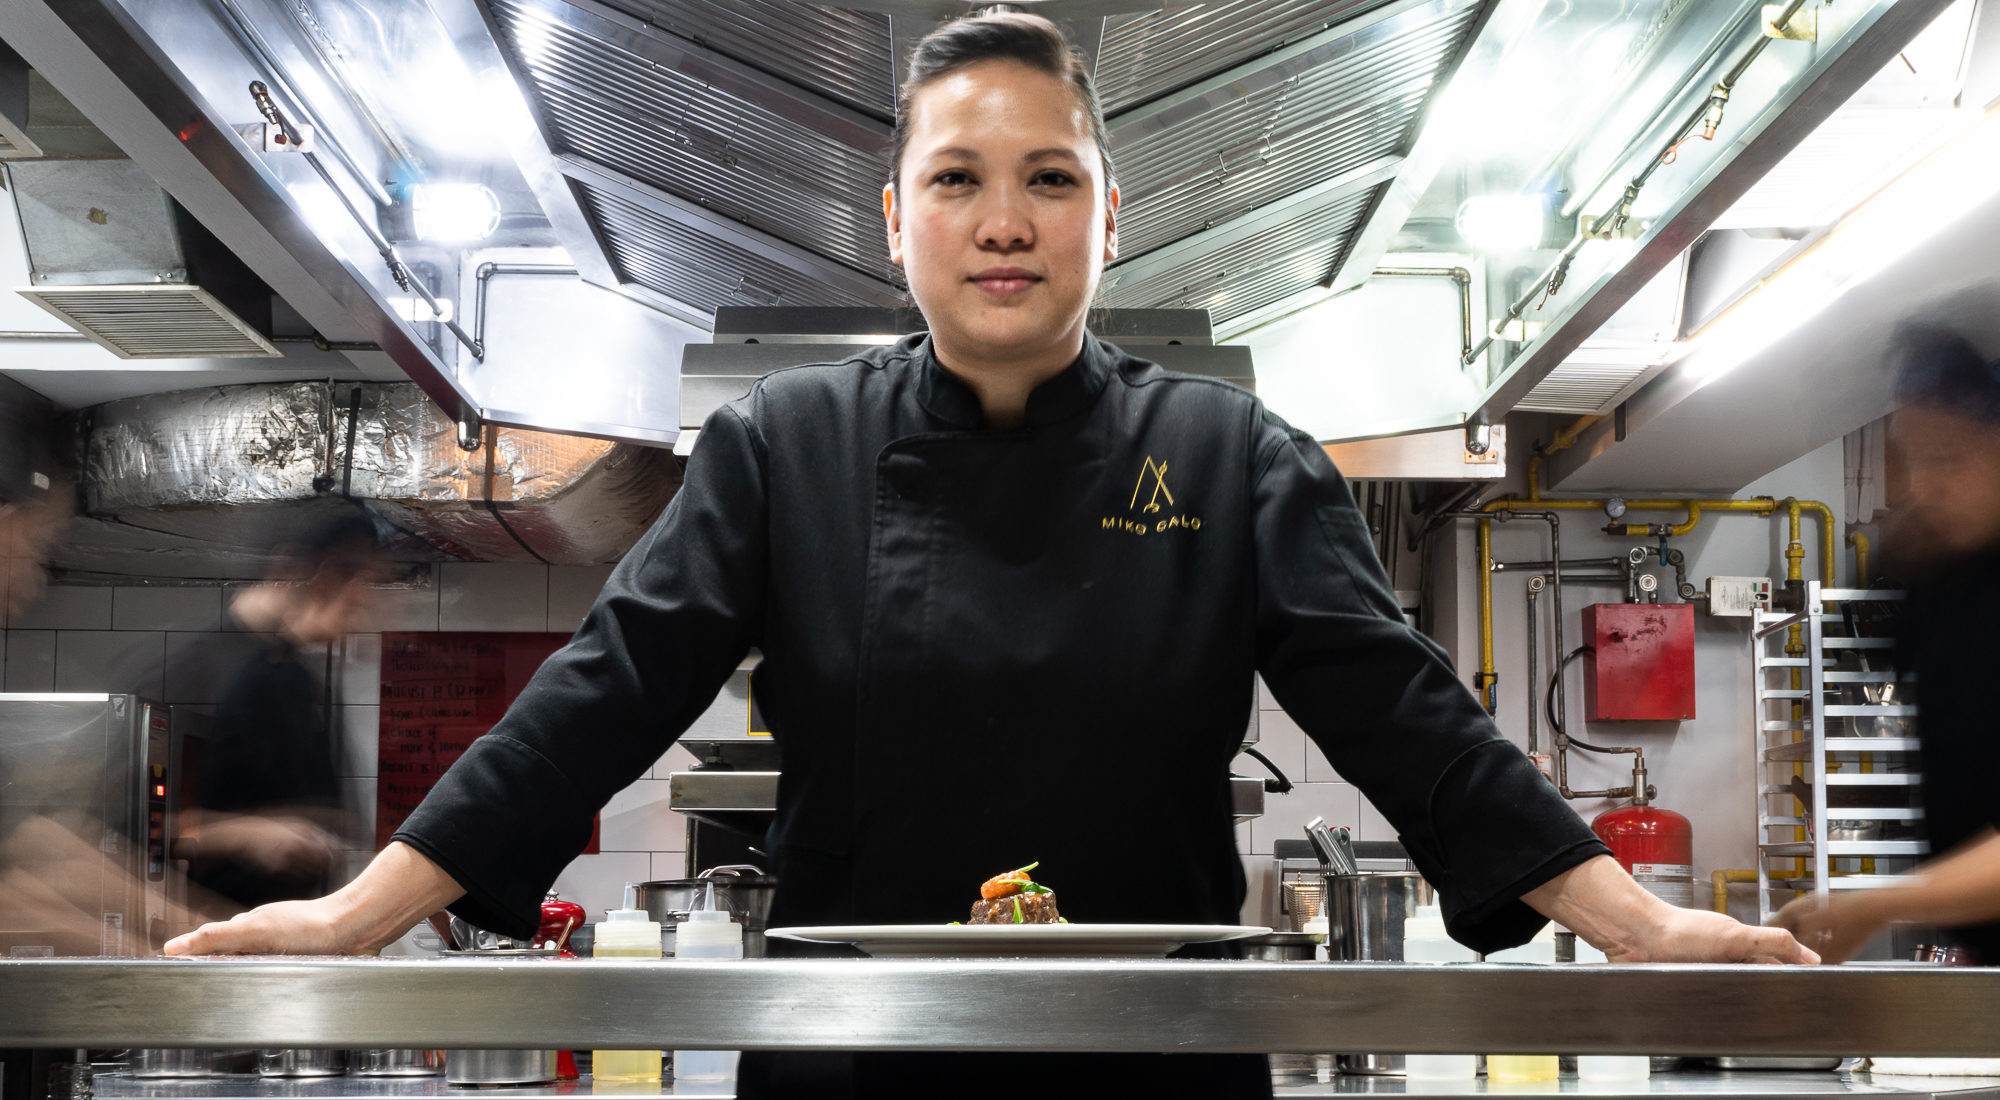 There is a vibrant, tempered energy to chef Miko Calo that mirrors in her restaurant Metronome